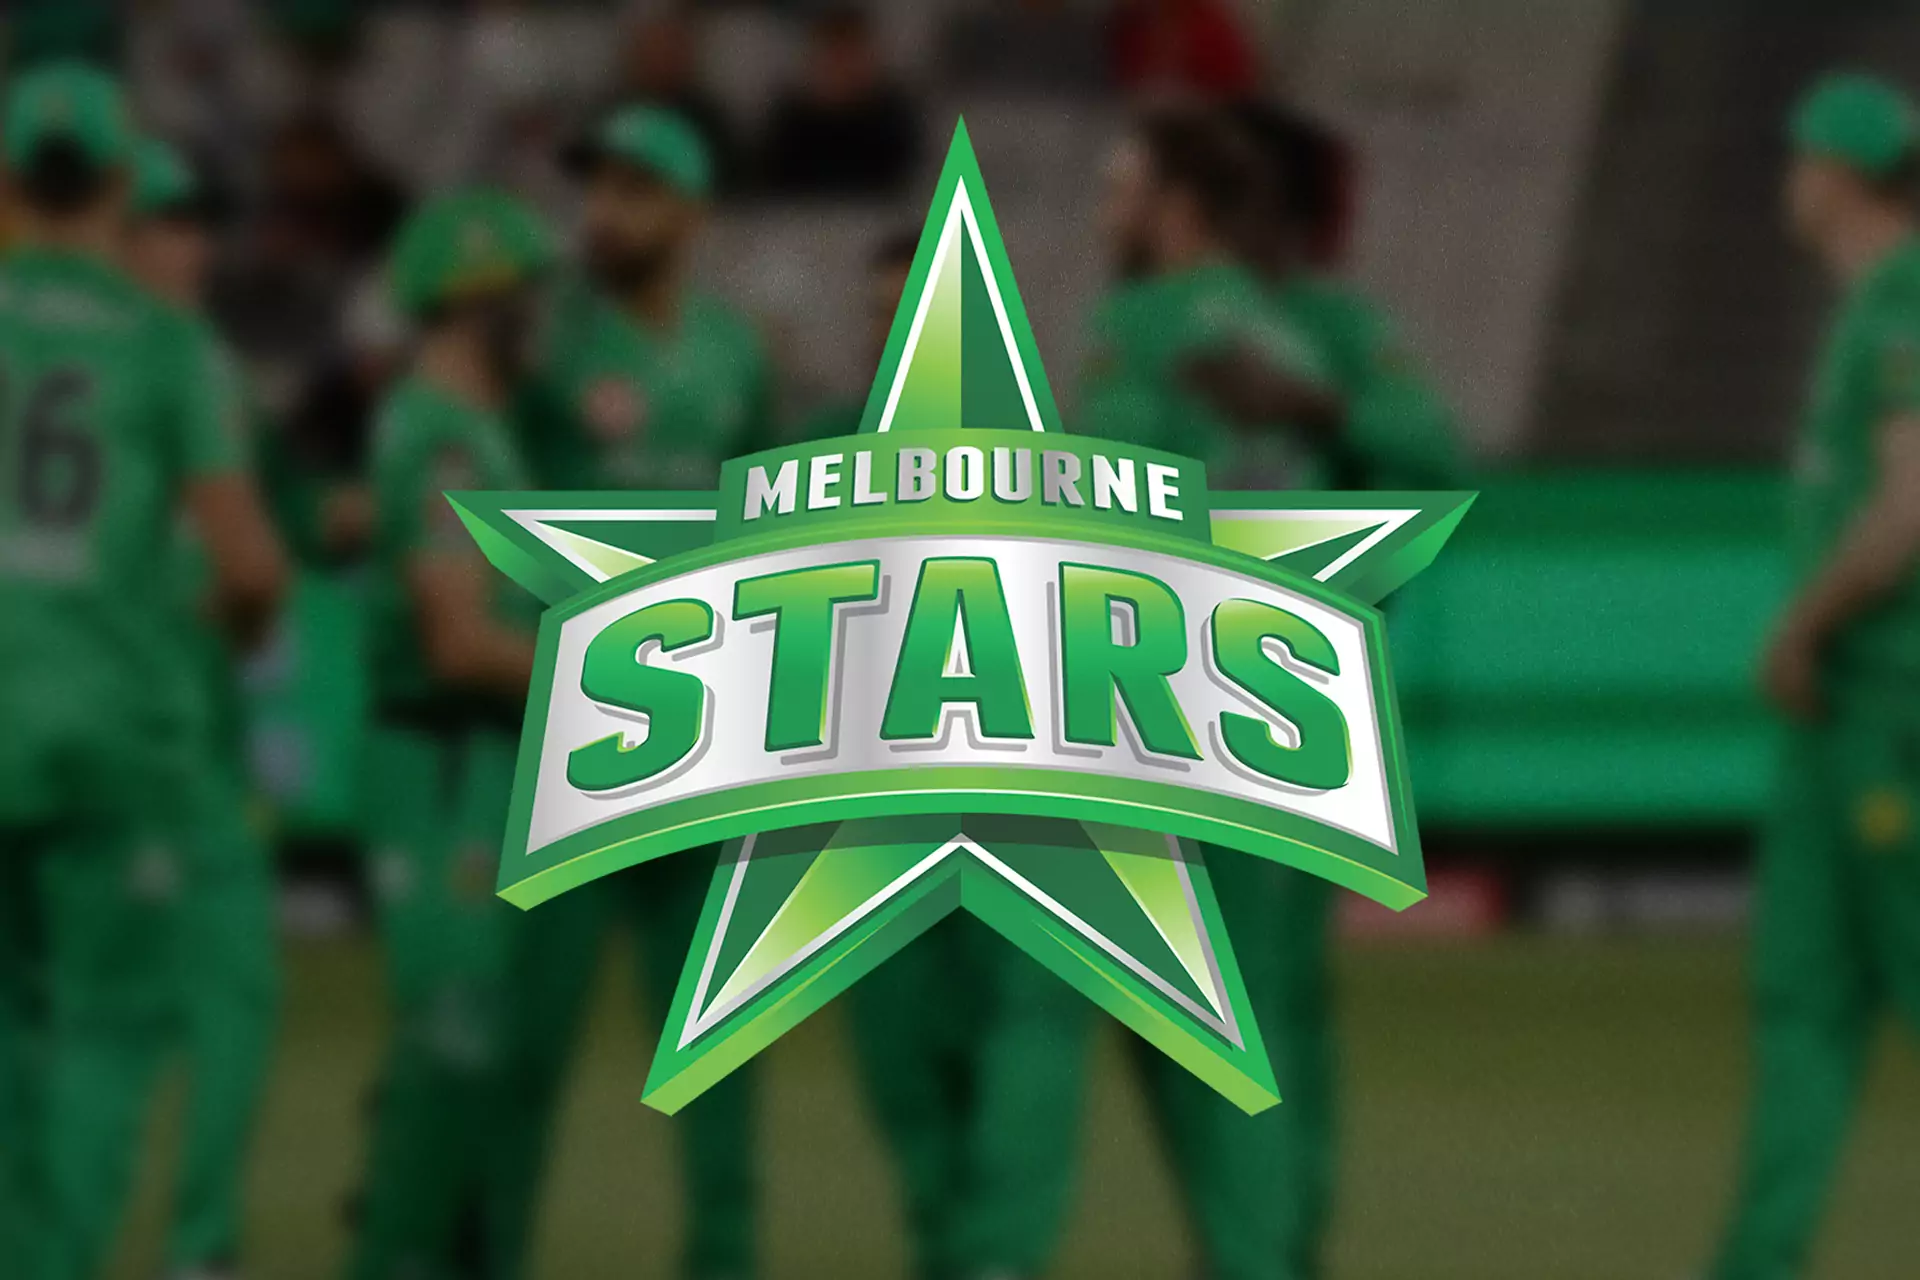 The Melbourne Stars has reached the final already three times.